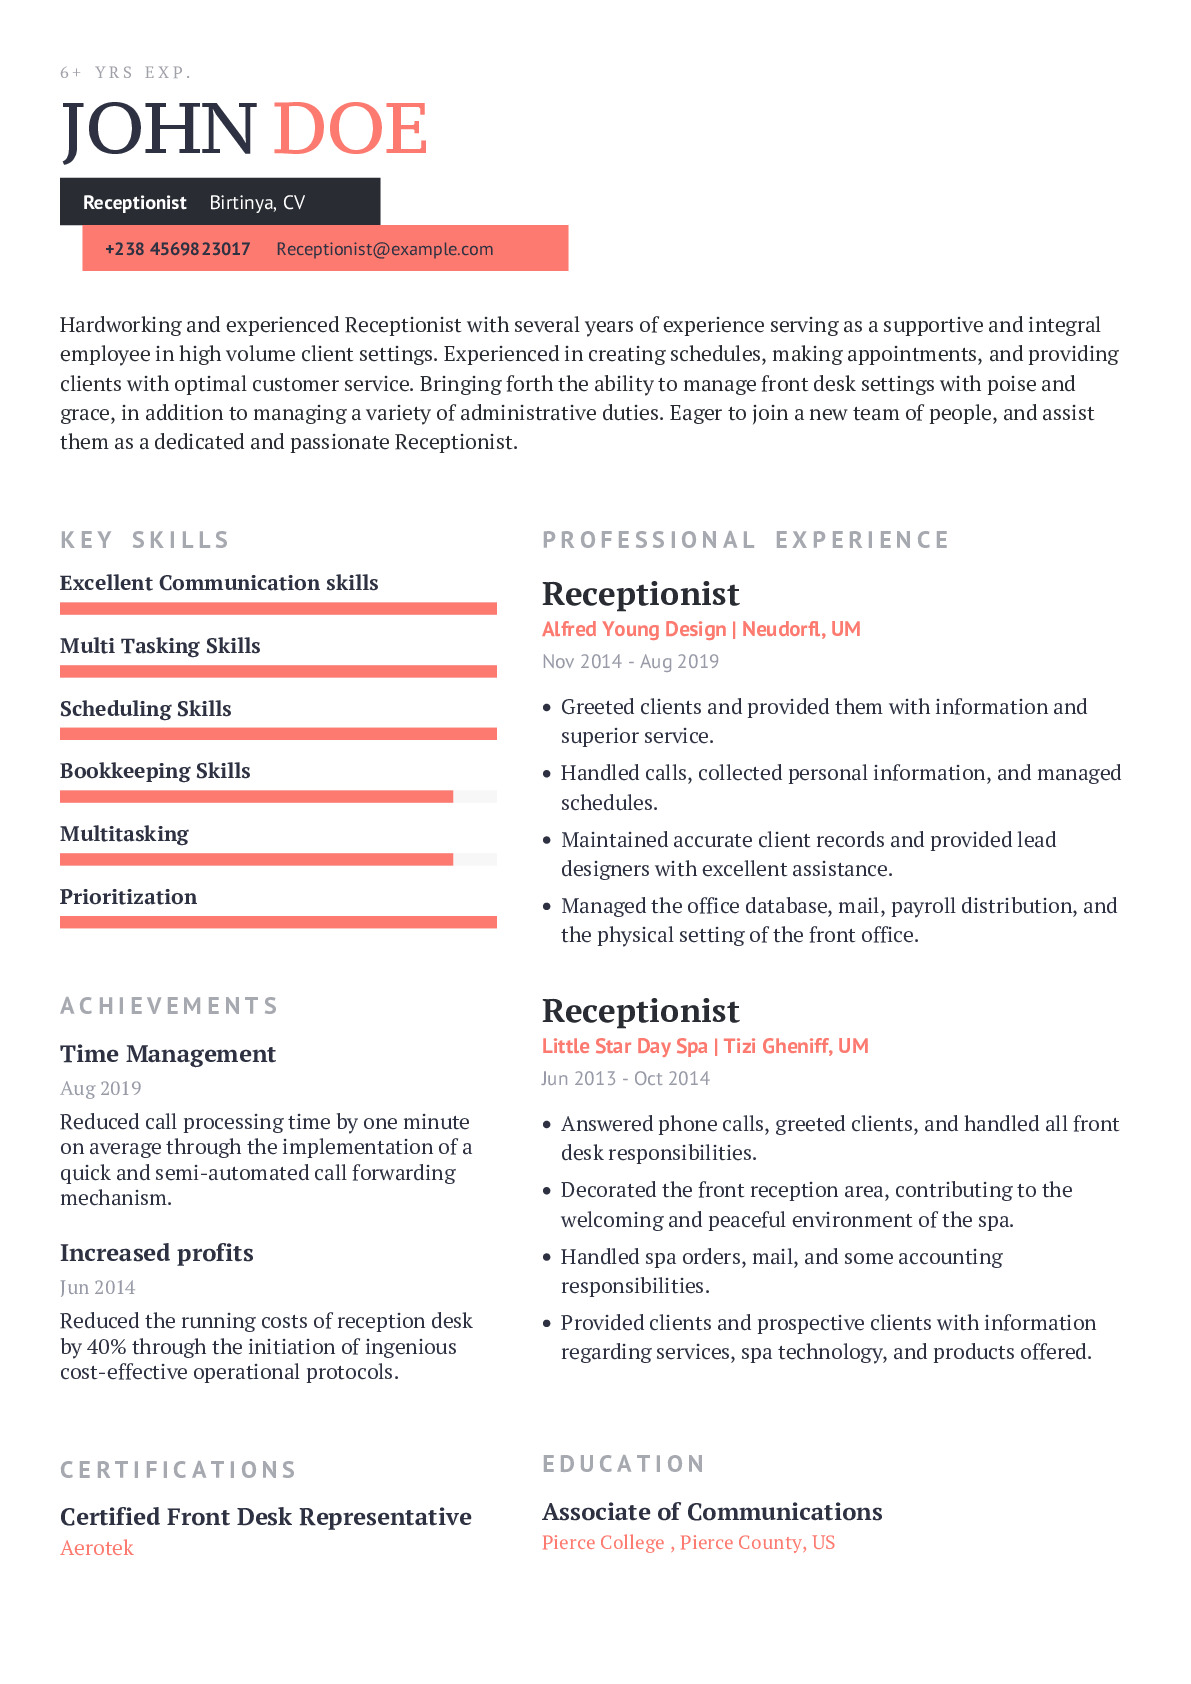 functional resume for receptionist